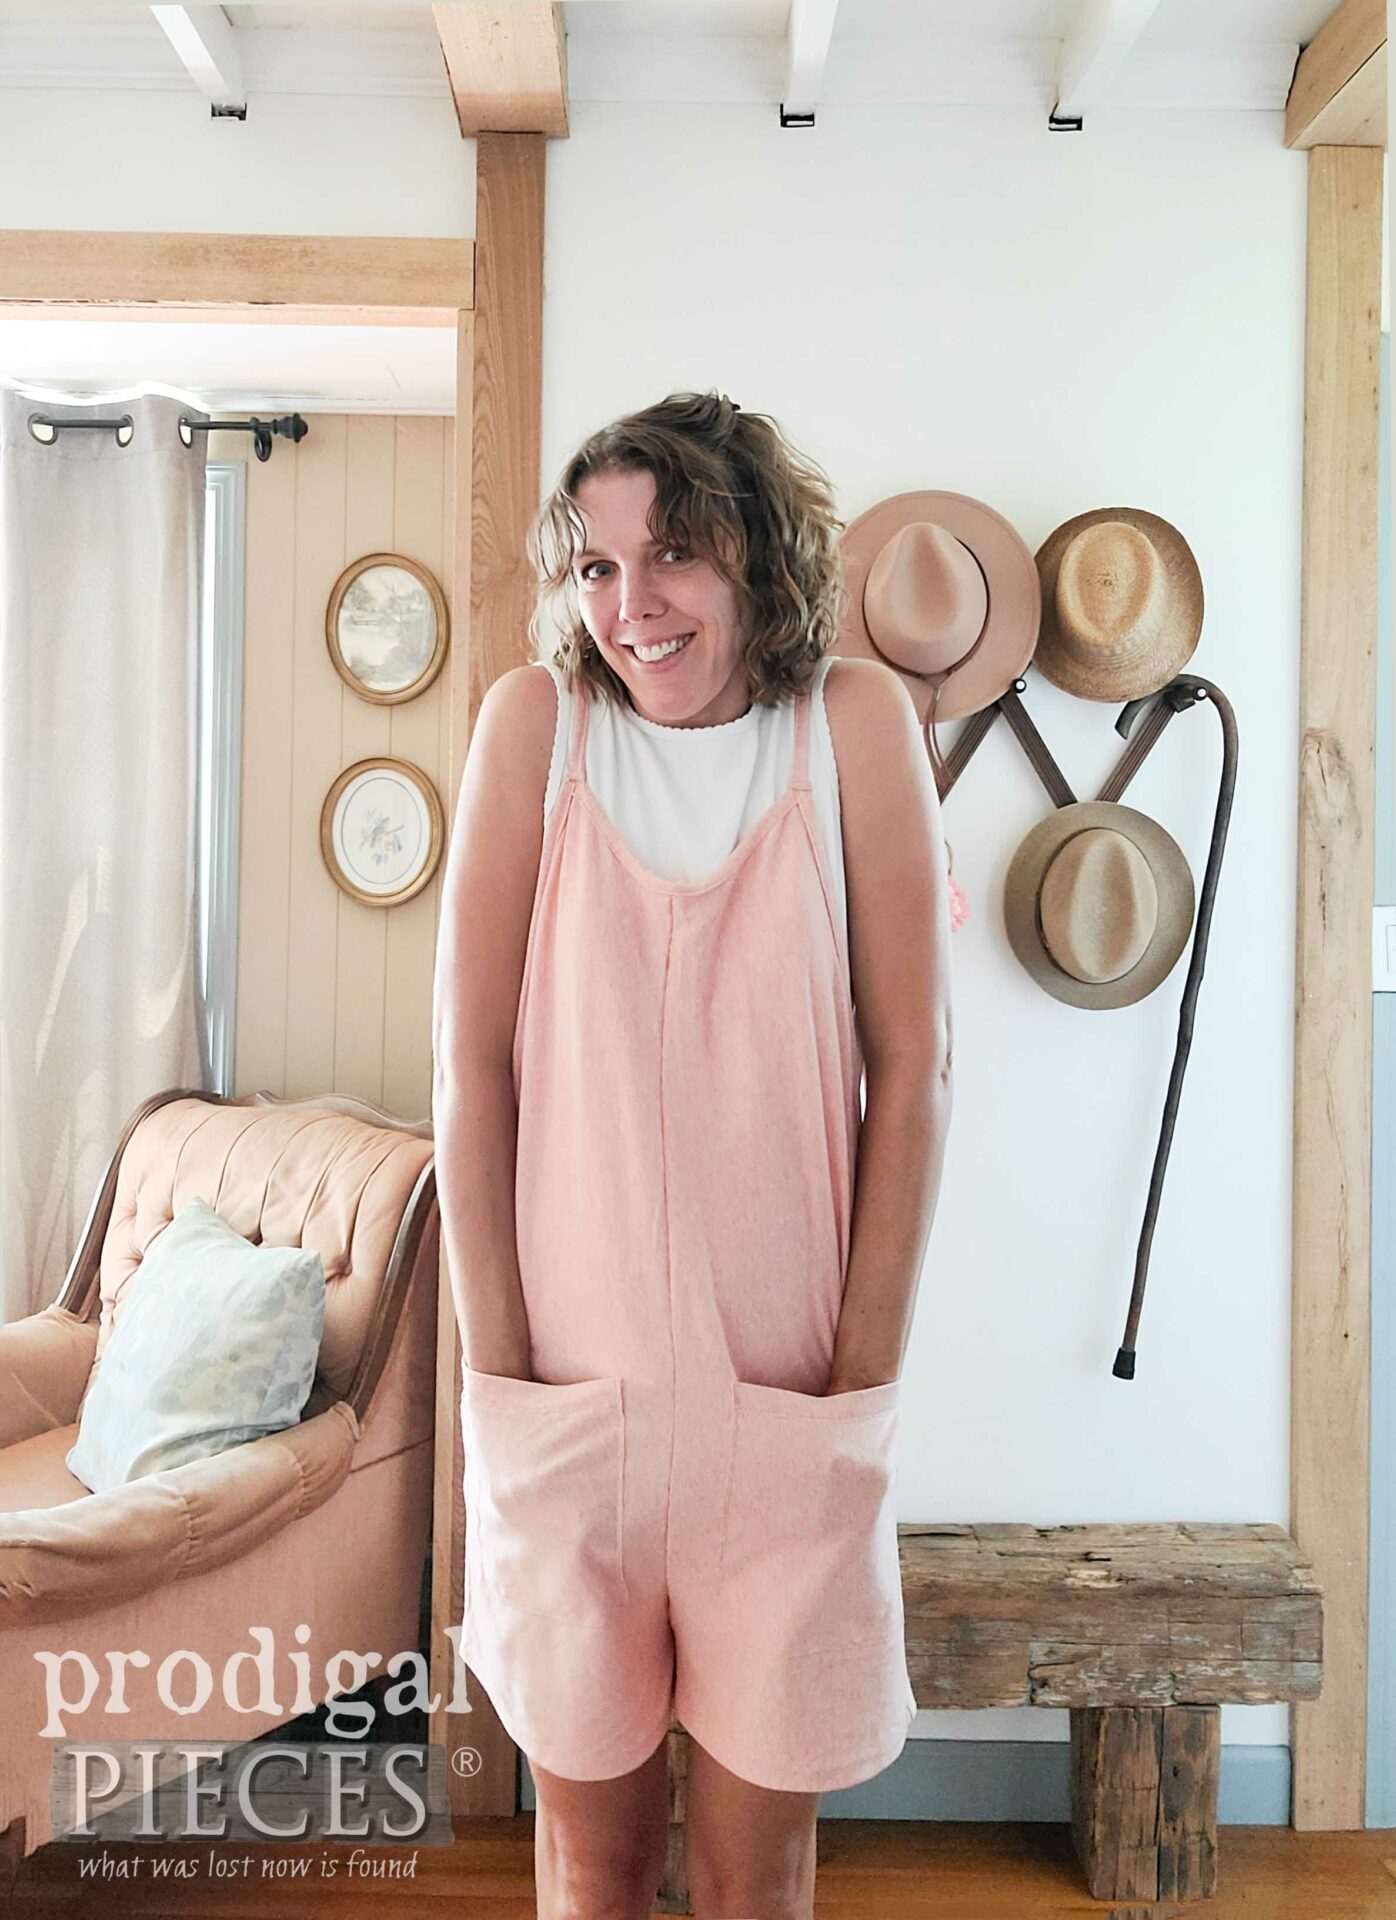 DIY Jersey Knit Refashioned Jumper from Bedsheet by Larissa of Prodigal Pieces | prodigalpieces.com #prodigalpieces #diy #sewing #refashion #clothes